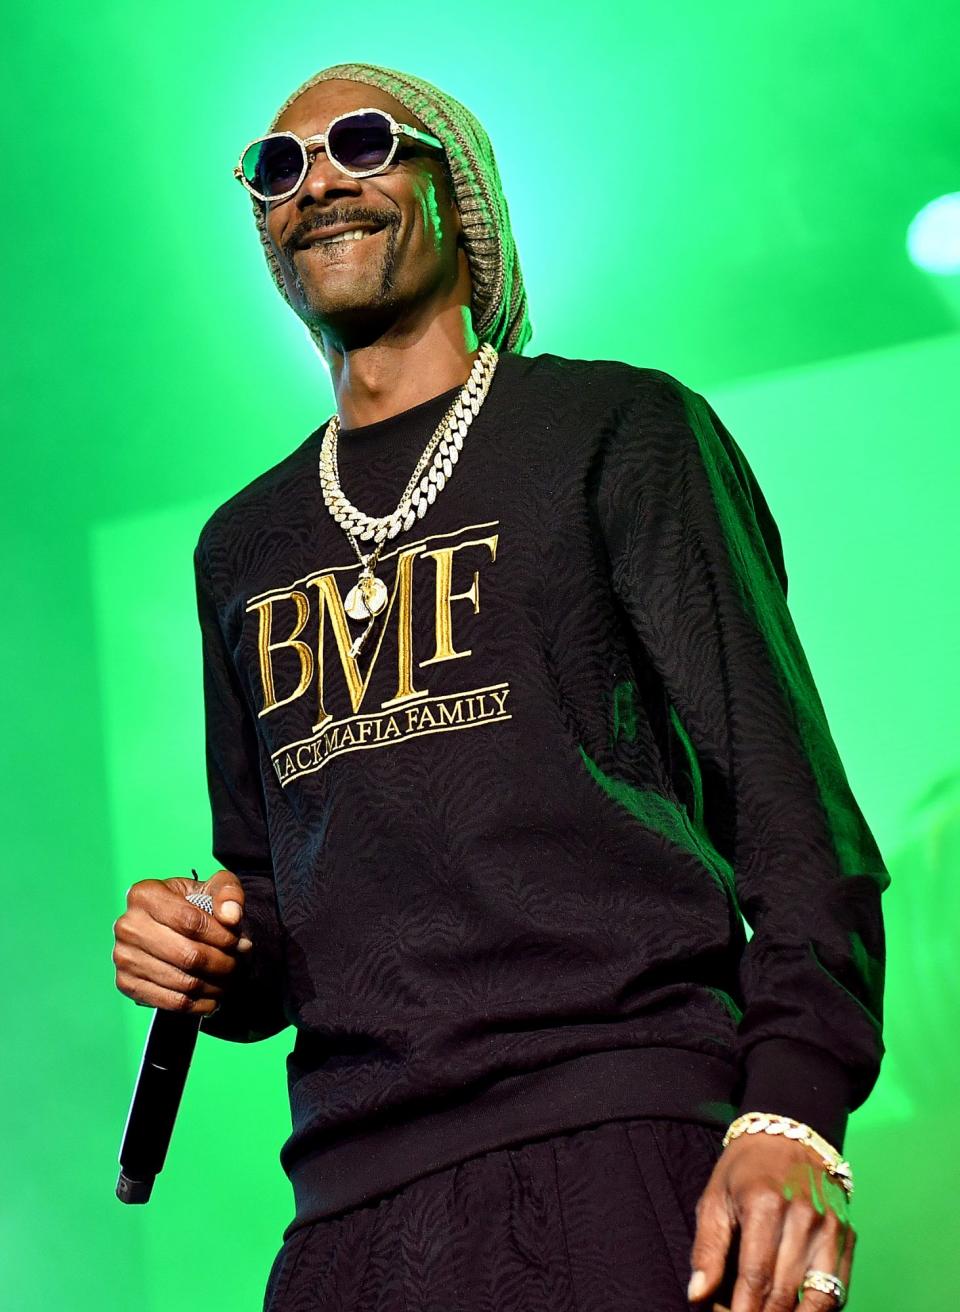 <p>Snoop Dogg performs at the world premiere screening and concert for Starz's new series <em>BMF</em> on Sept. 23 at Cellairis Amphitheatre in Atlanta. </p>